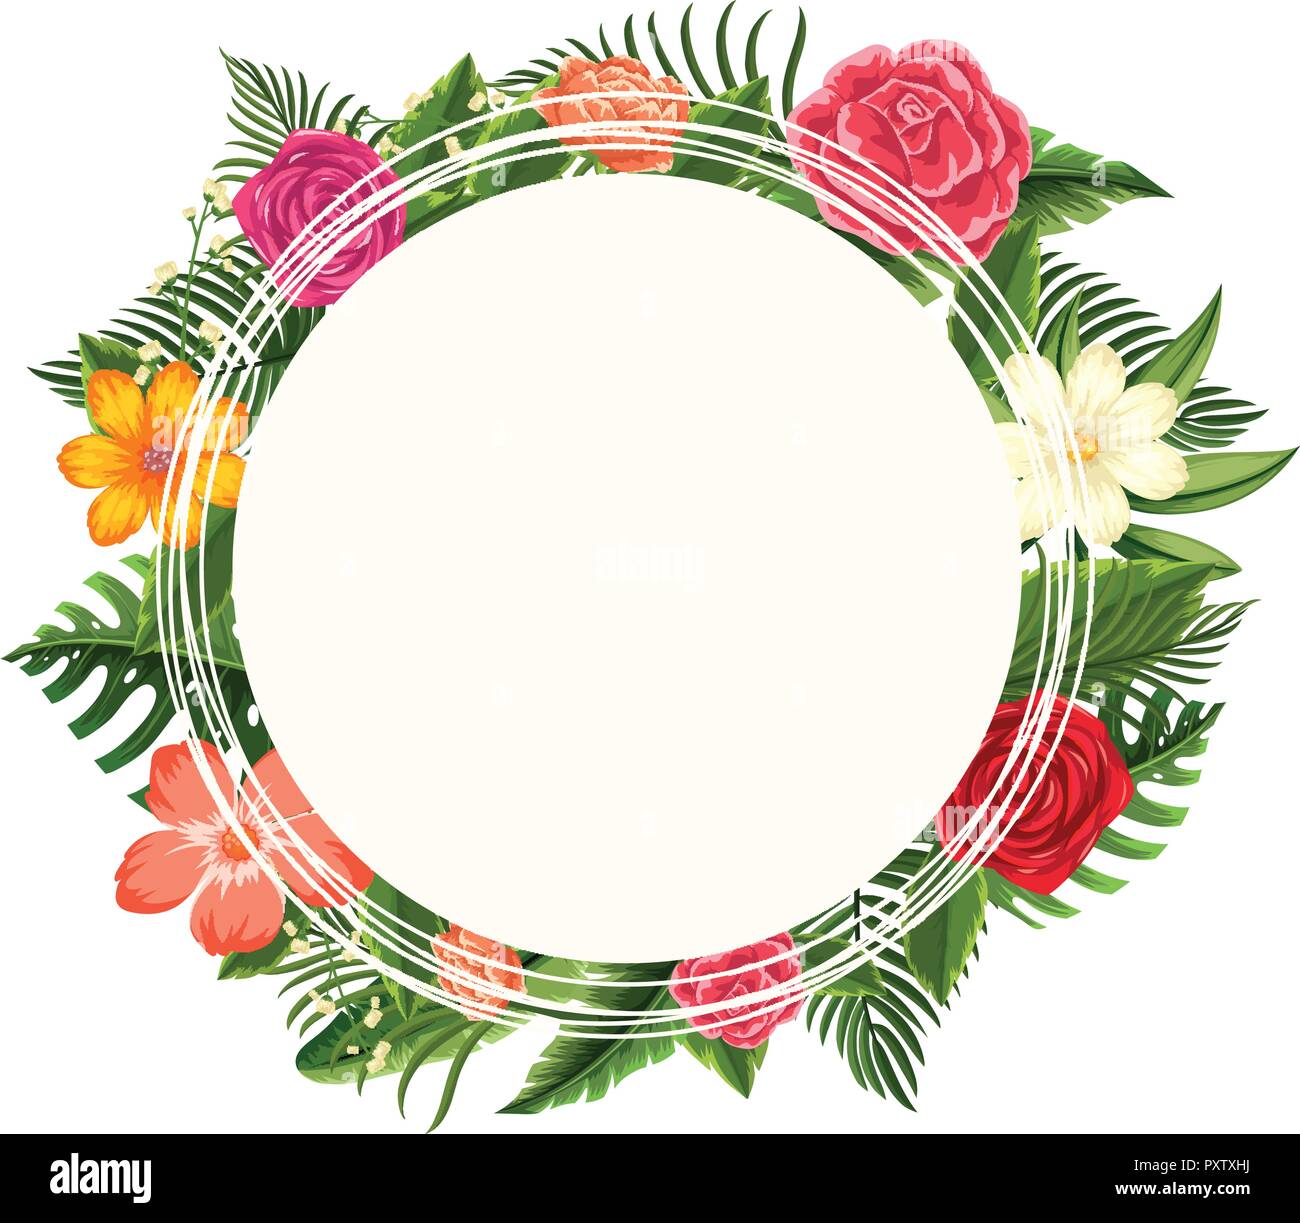 Round frame with different types of flowers illustration Stock ...